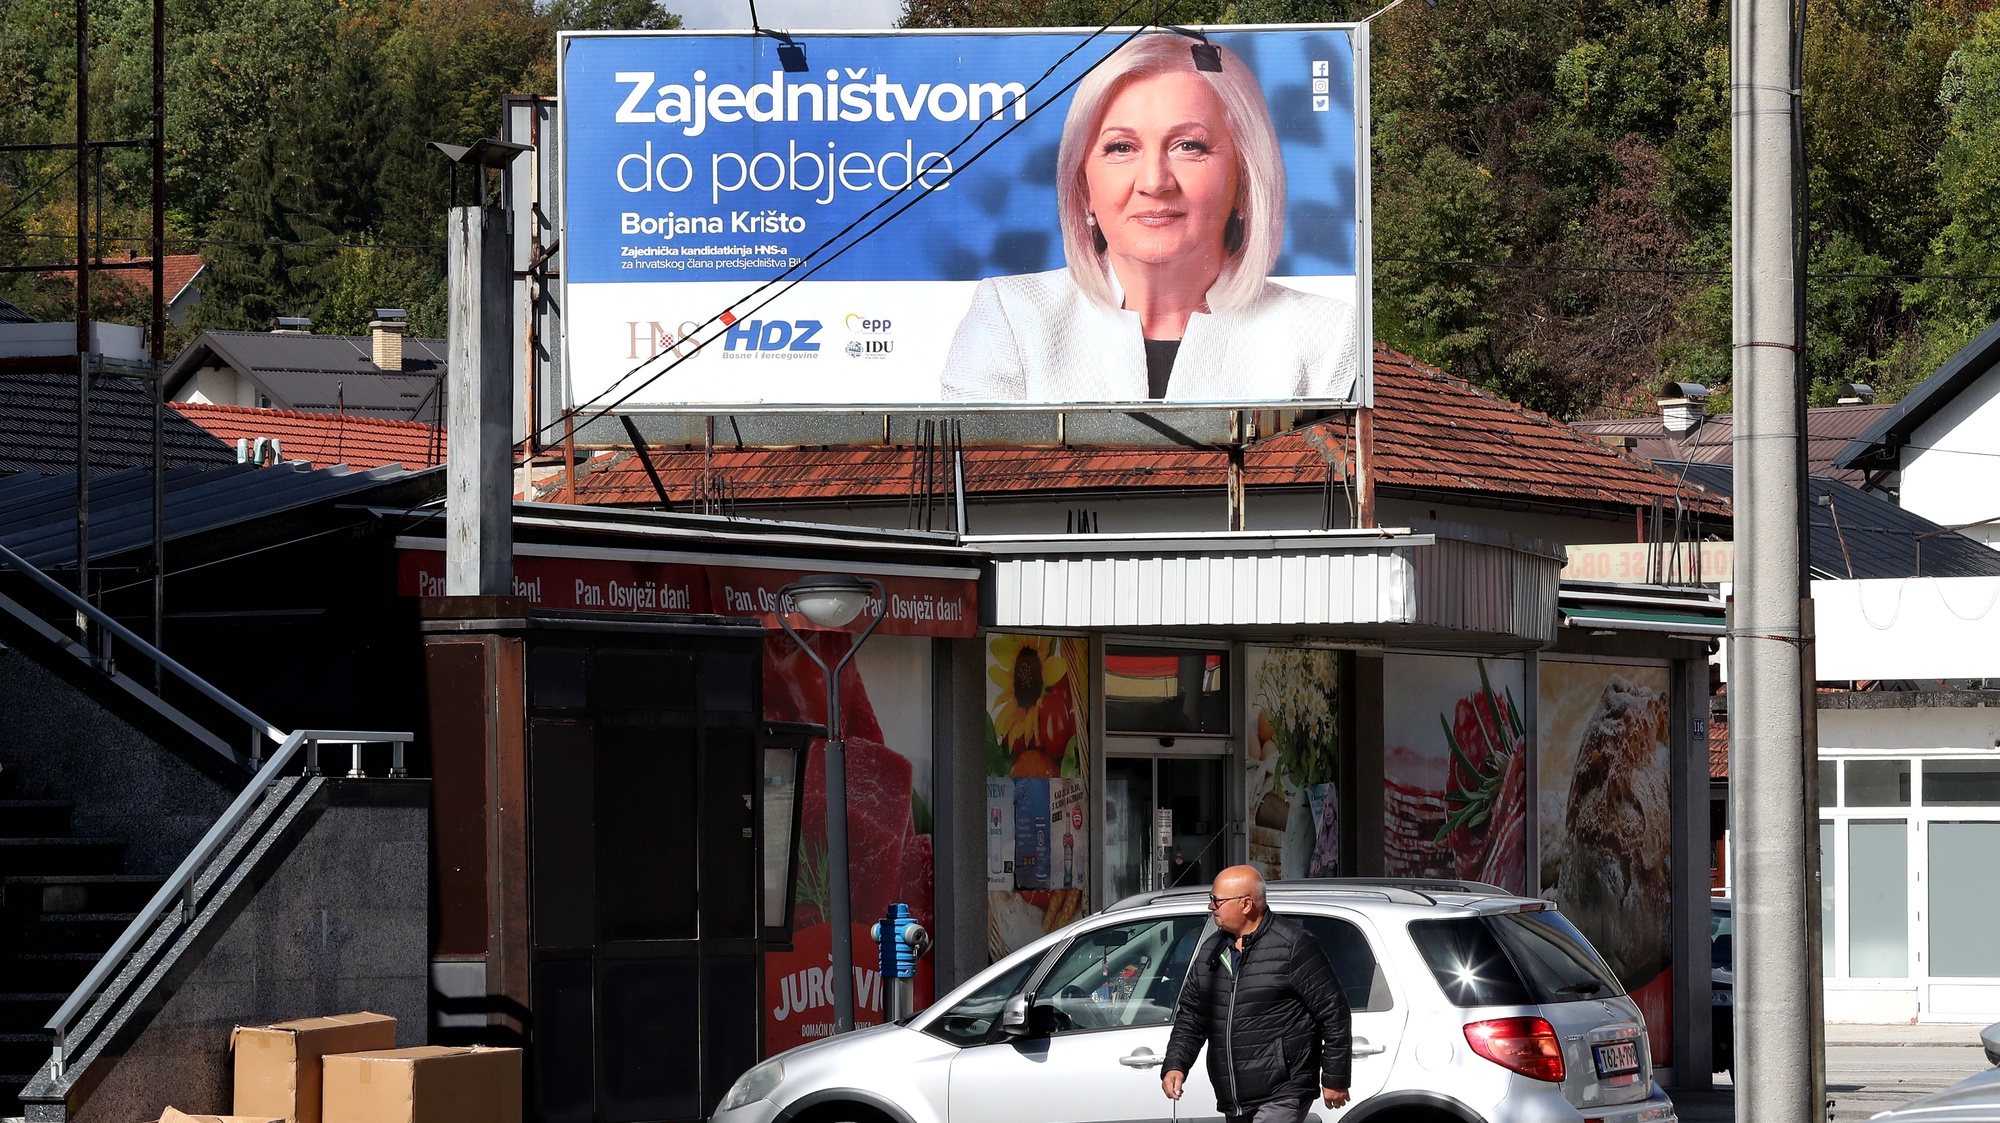 epa10213597 A poster of Croatian candidate for member of the Bosnian presidency Borjana Kristo of the Croatian Democratic Union party in Kiseljak, Bosnia and Herzegovina, 29 September 2022. More than three million Bosnian citizens are expected to vote in the country&#039;s general elections on 02 October. 90 political parties and 10 candidates for the three members of the Bosnian presidency were registered.  EPA/FEHIM DEMIR